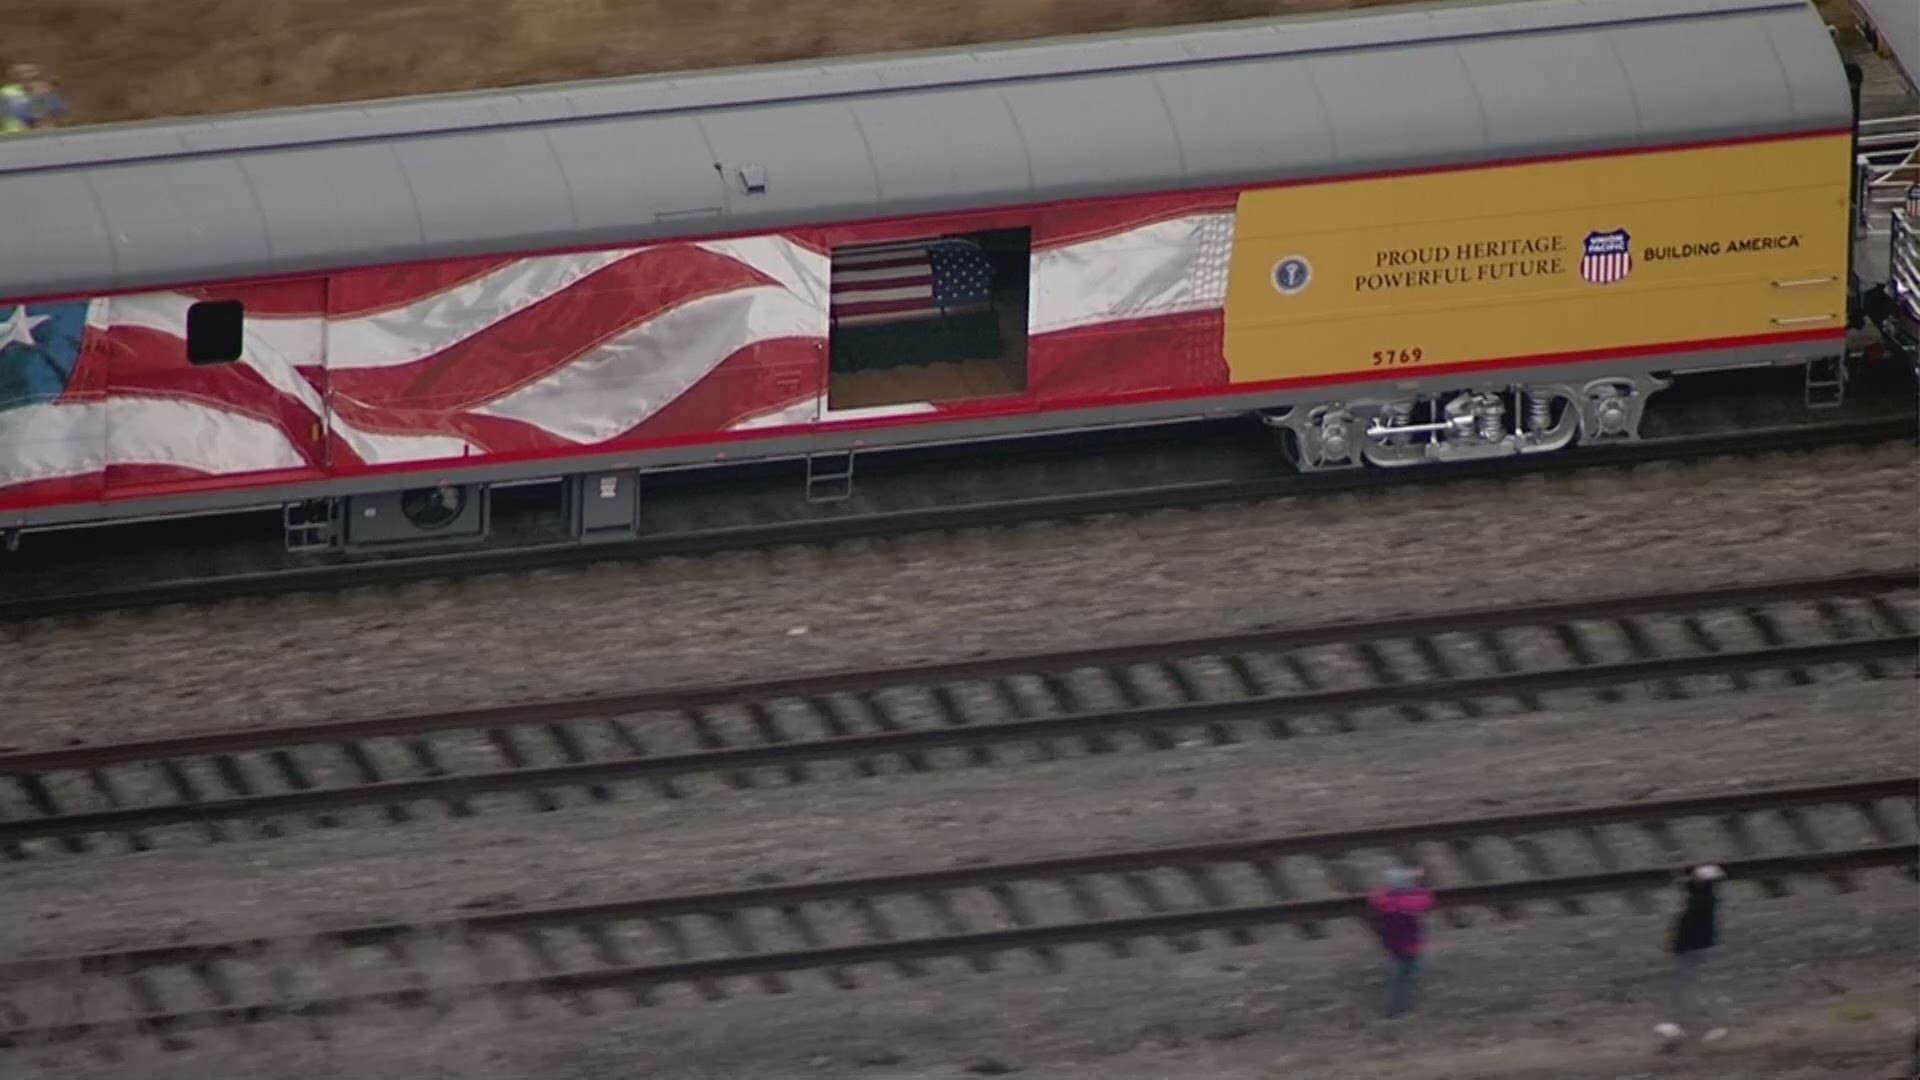 President George H.W. Bush's train is seen from the air on its route to Bush's final resting place in College Station.